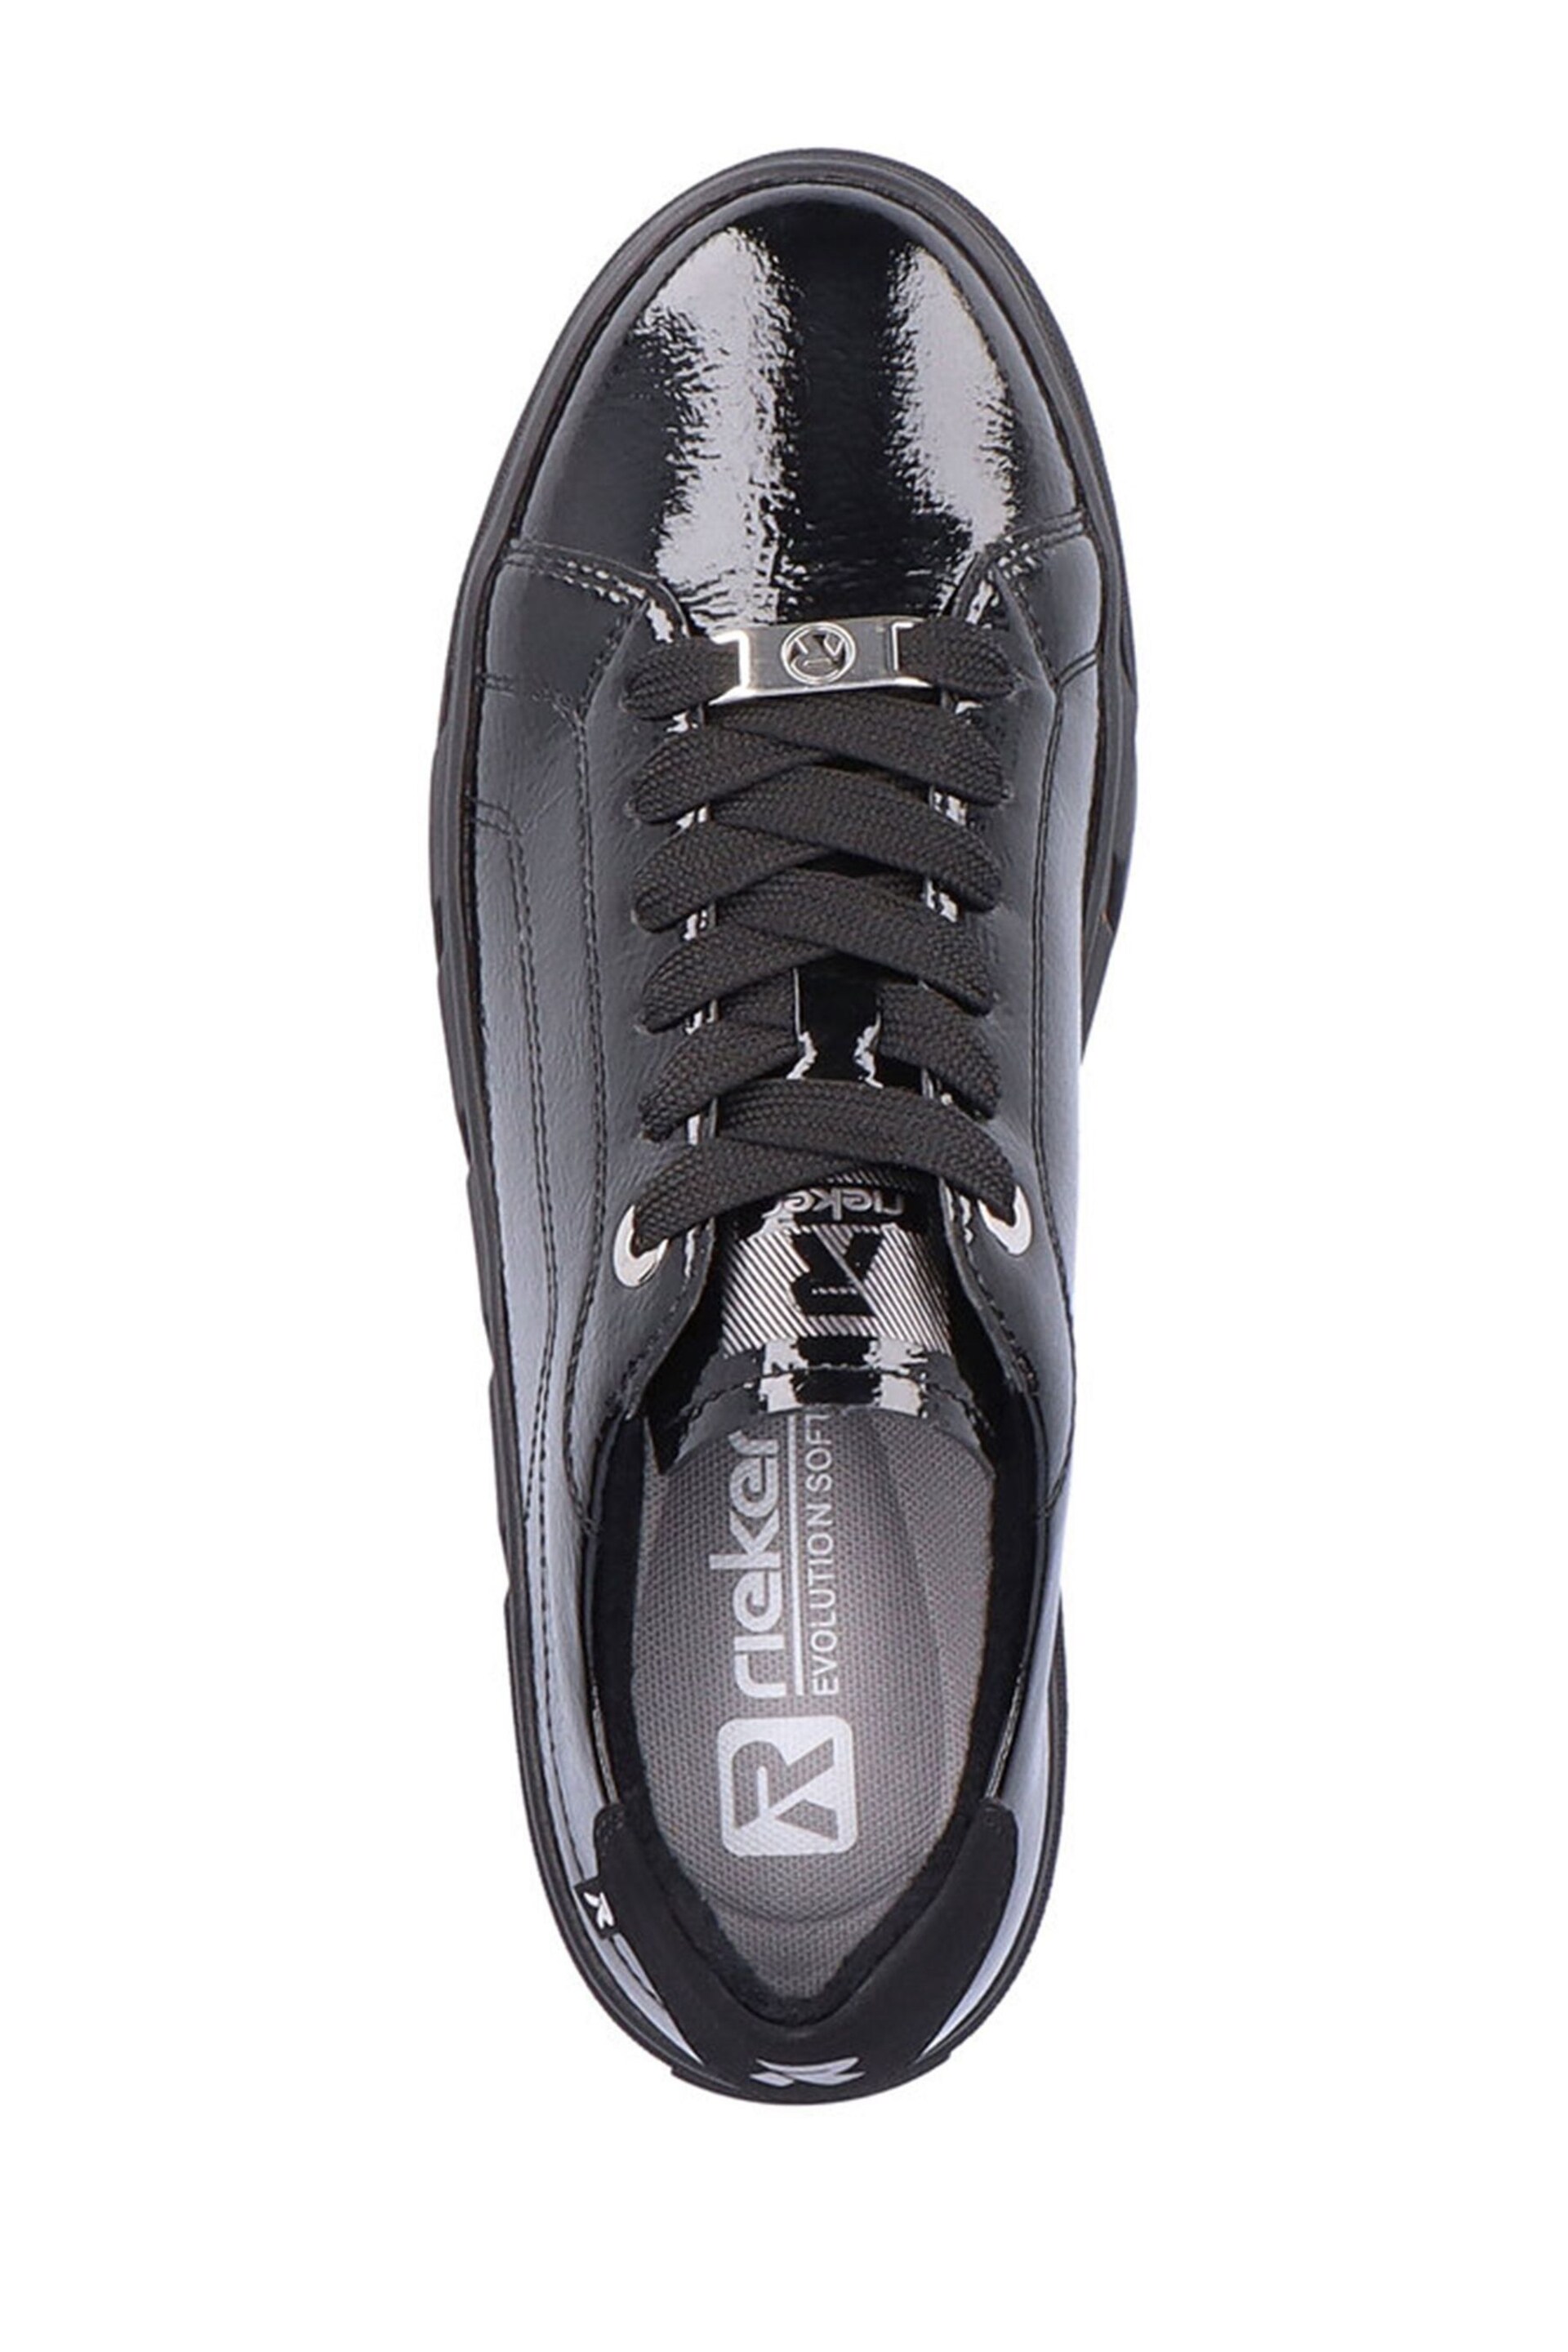 Rieker Womens Evolution Lace-Up Black Trainers - Image 6 of 11